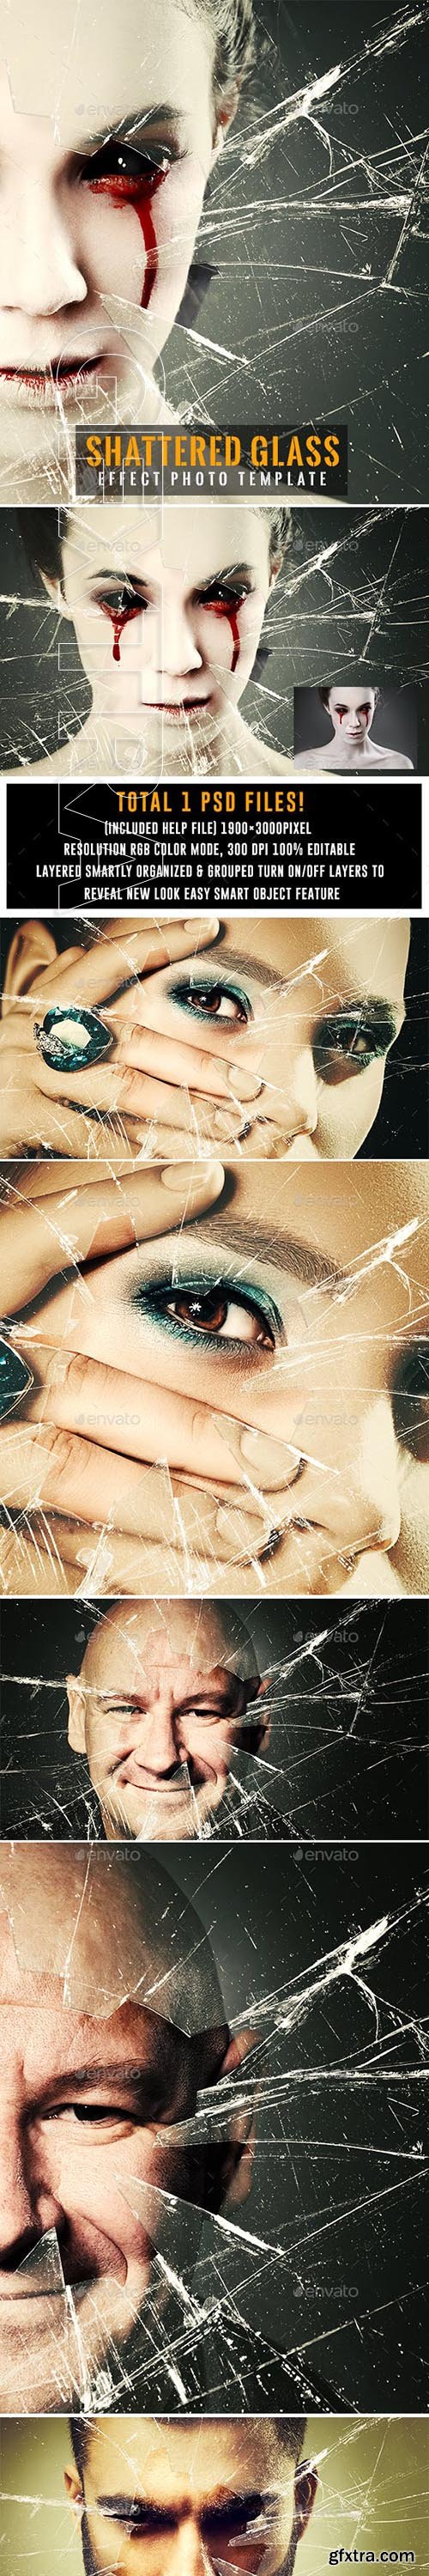 GraphicRiver - Shattered Glass Effect Photo Template 23700524